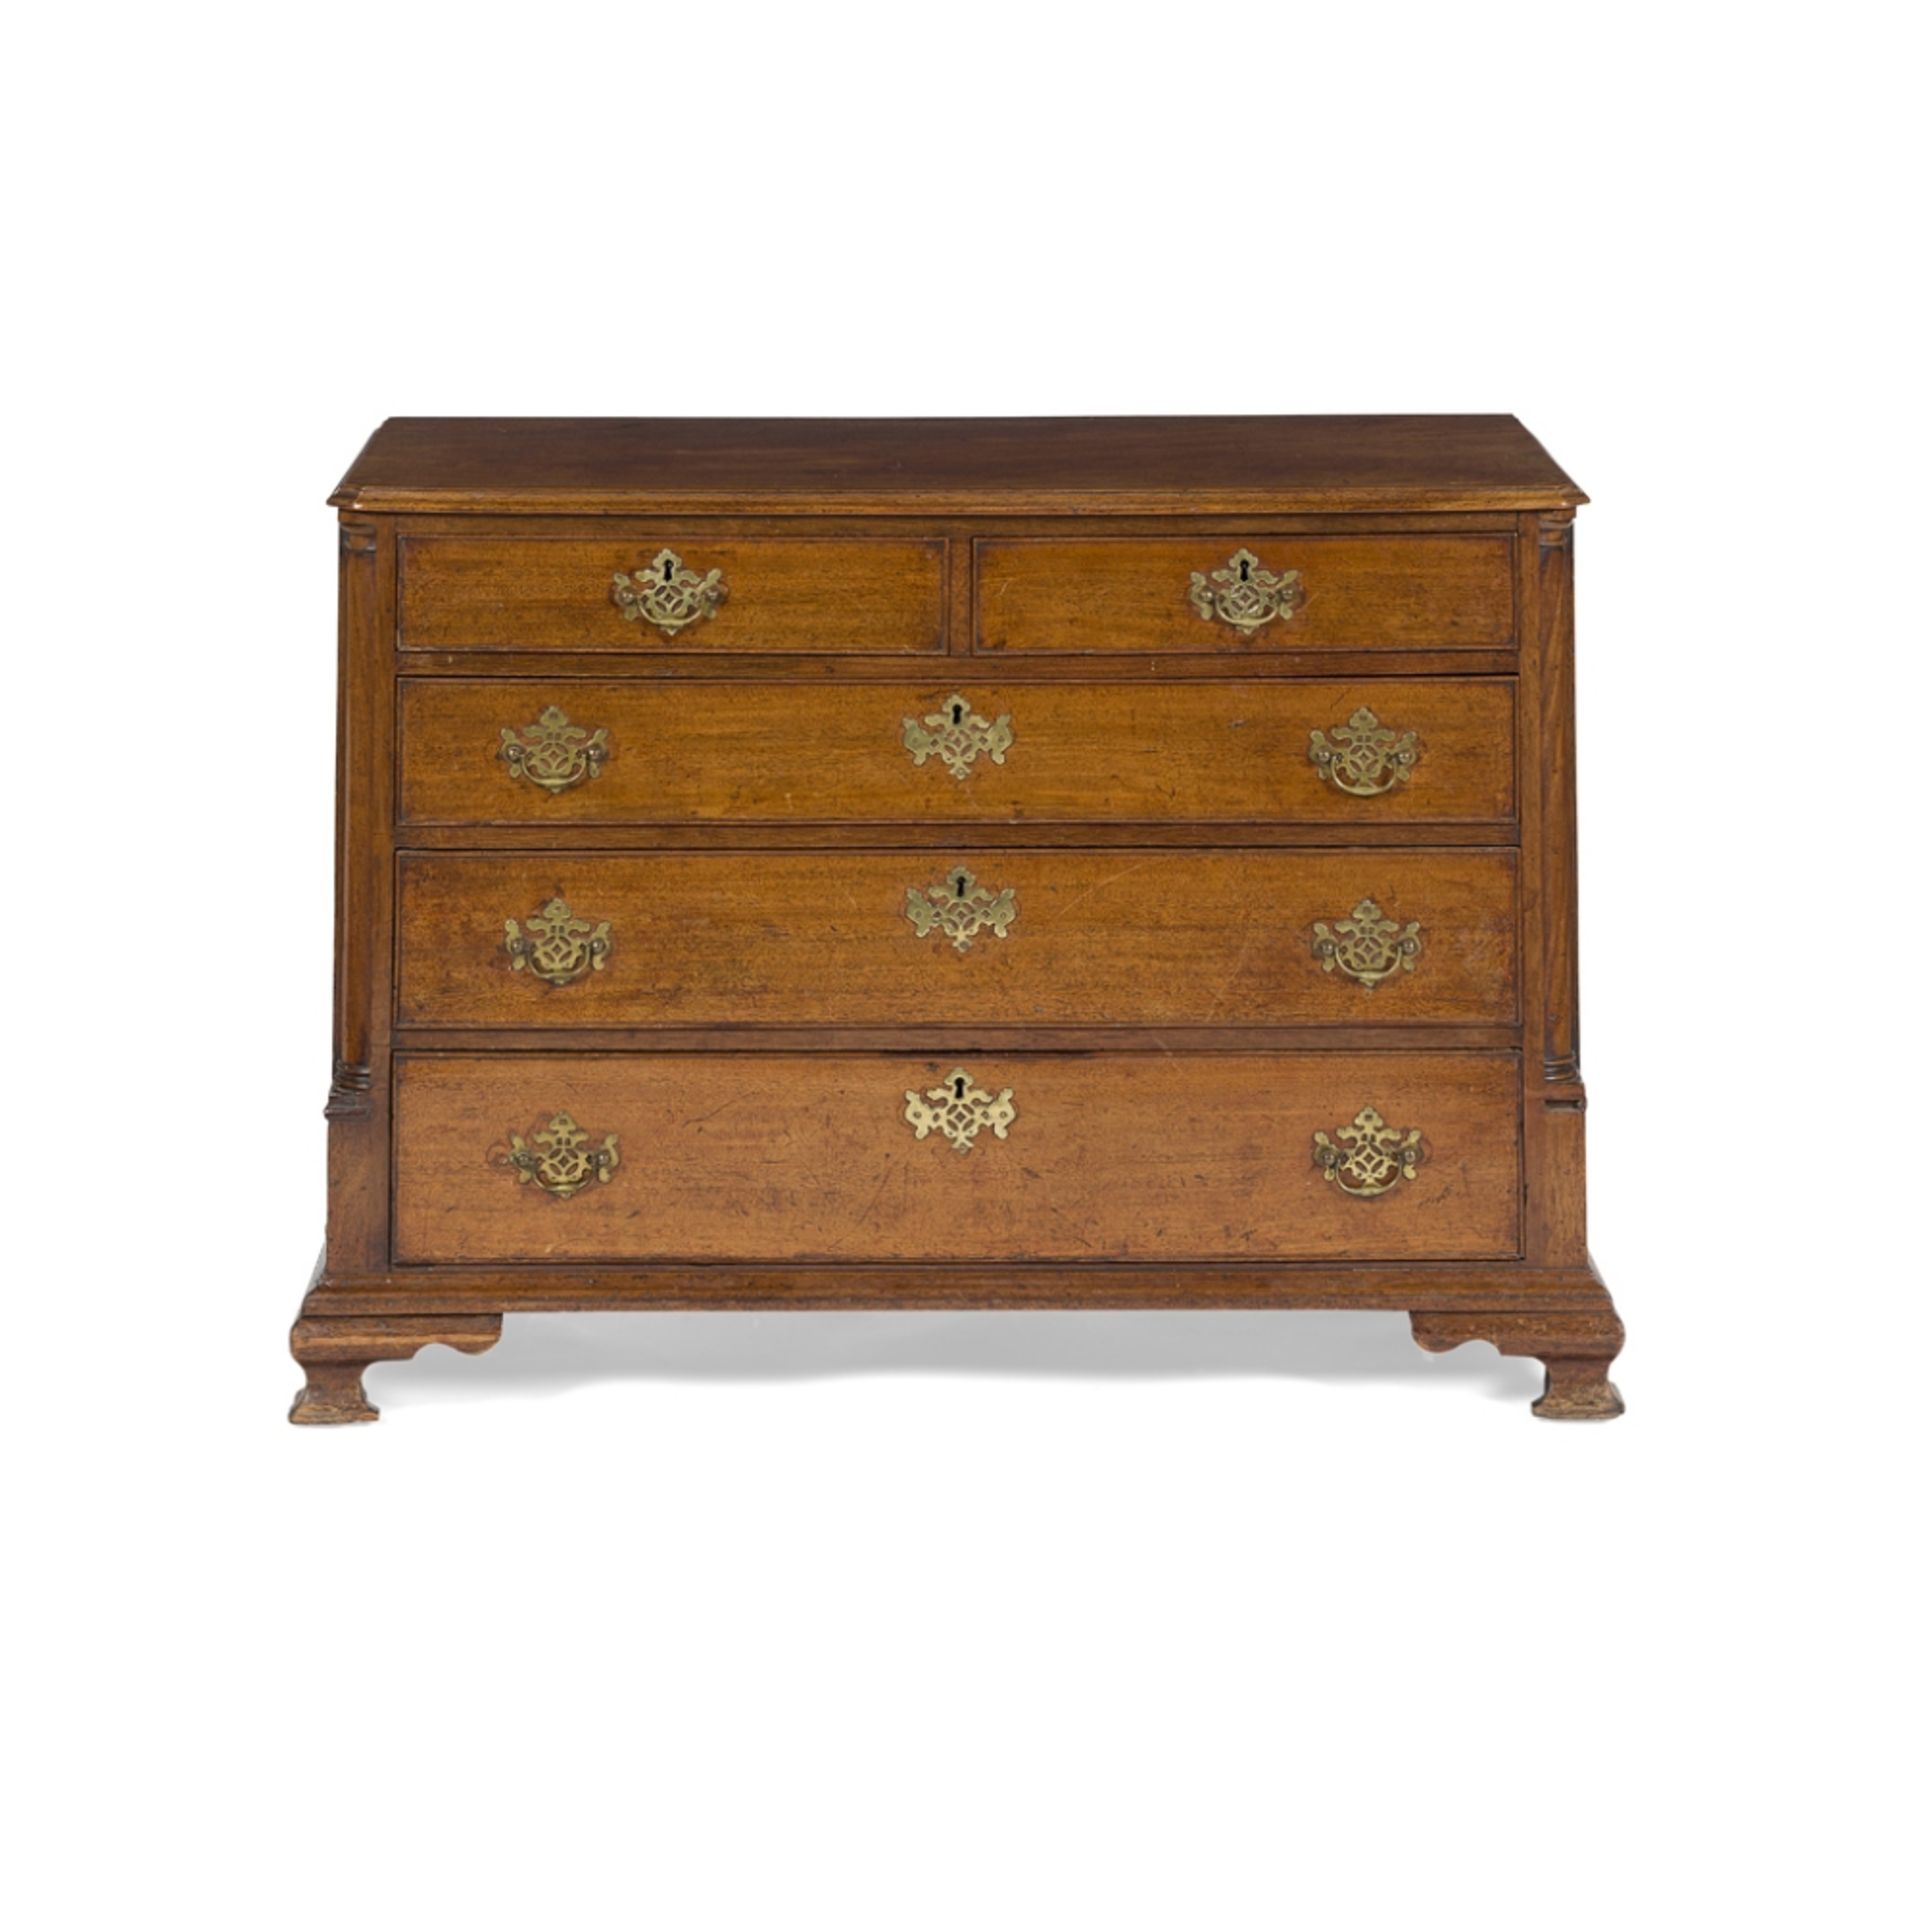 GEORGE III MAHOGANY CHEST OF DRAWERS, LANCASHIRE18TH CENTURY the top with a moulded edge above two